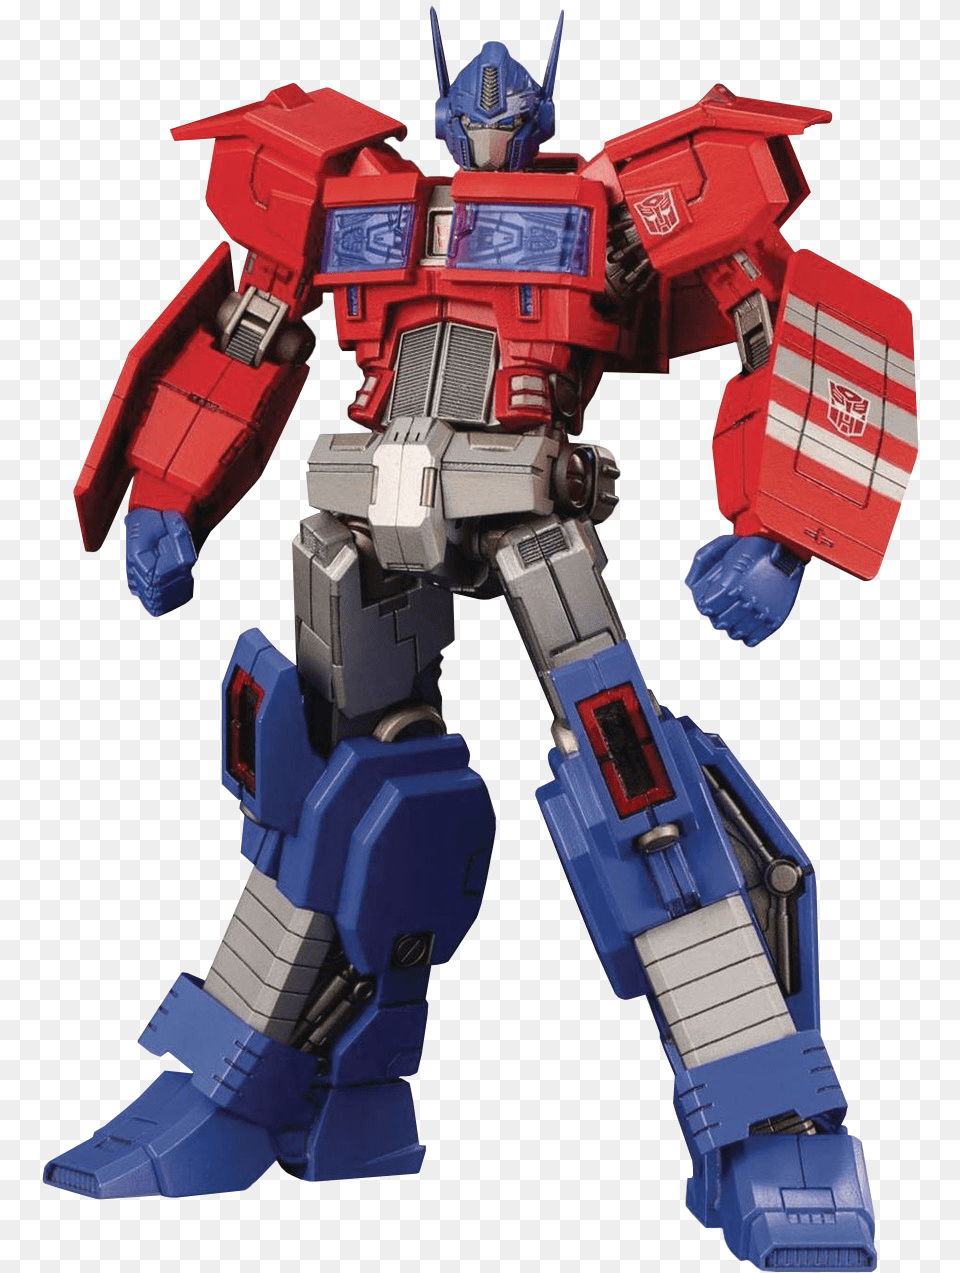 Transformers Flame Toys Idw Optimus Prime, Robot, Toy Png Image